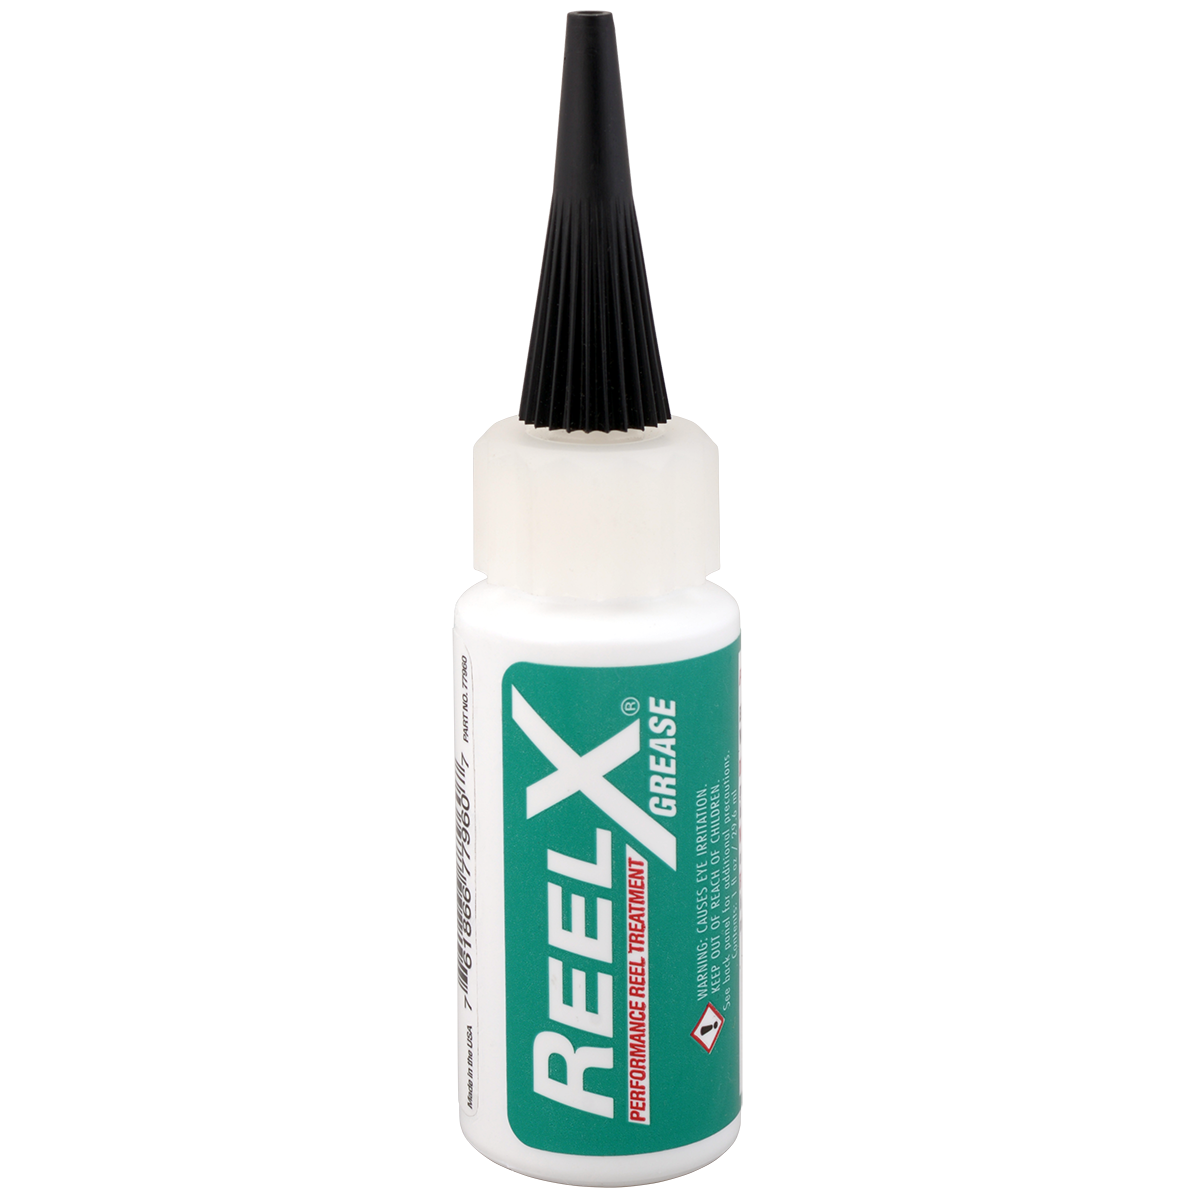 Fishing Reel Grease - Lubricant Grease Tube,Reel Oil for Effective